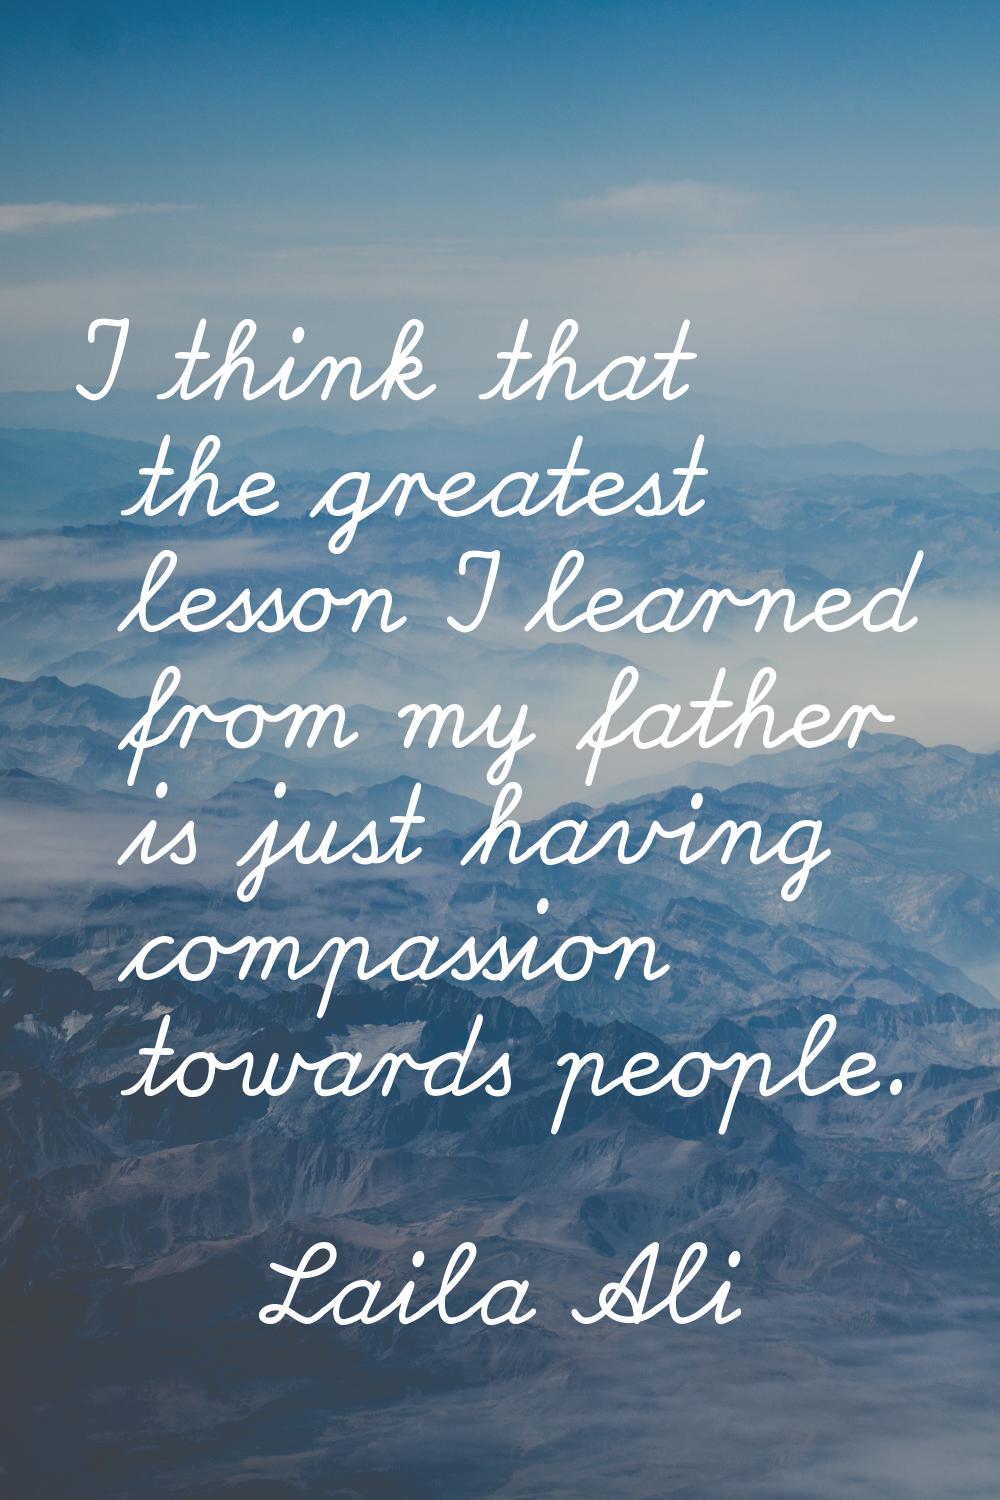 I think that the greatest lesson I learned from my father is just having compassion towards people.